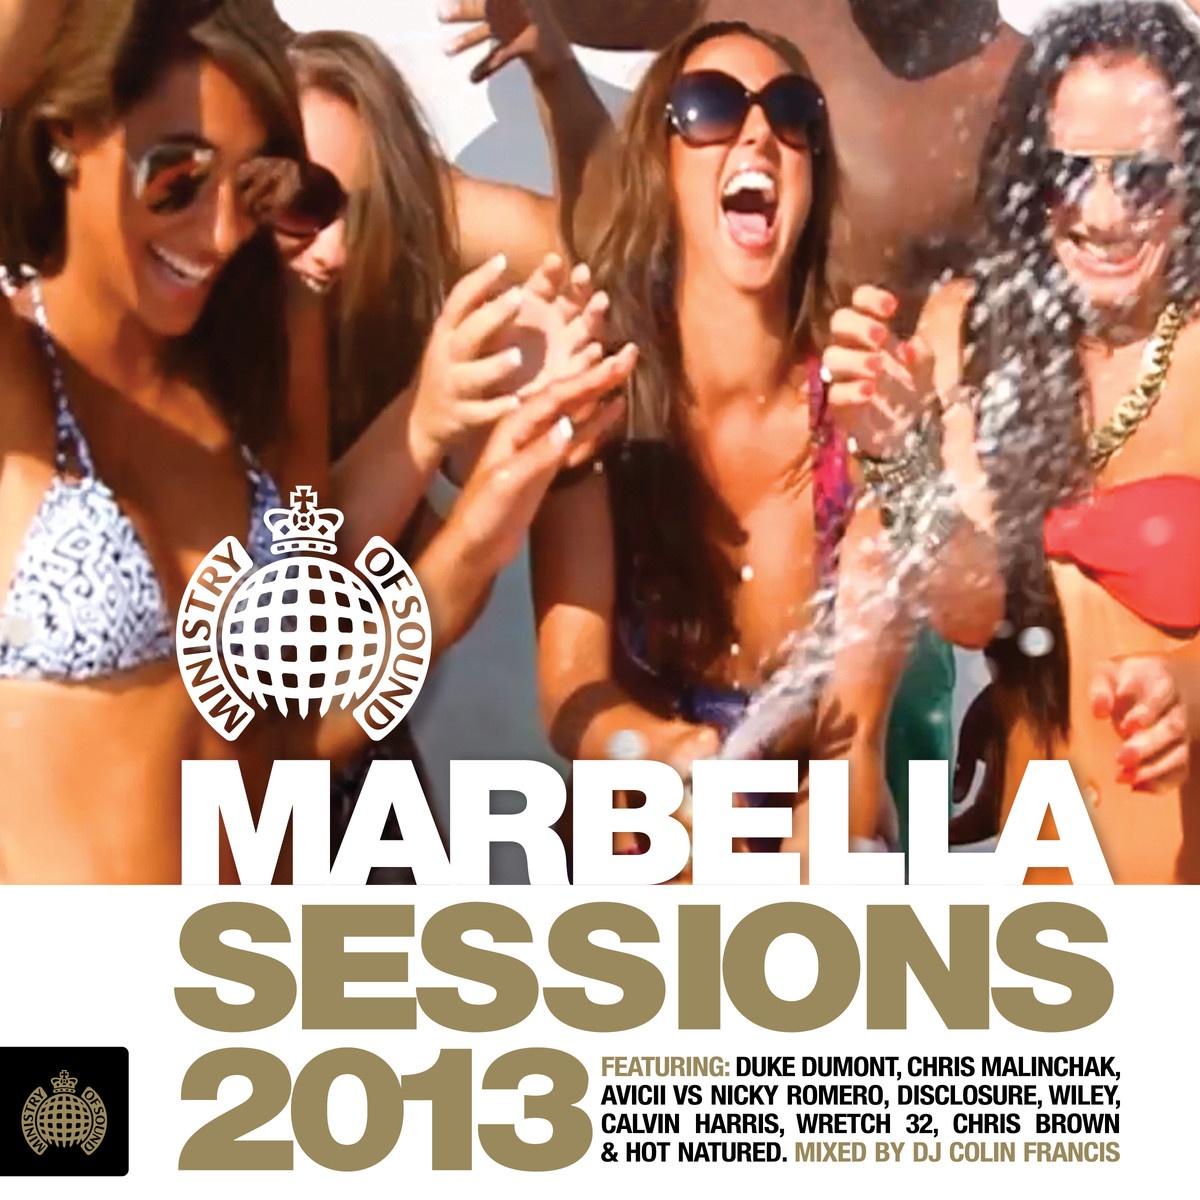 Marbella Sessions 2013 - Ministry of Sound